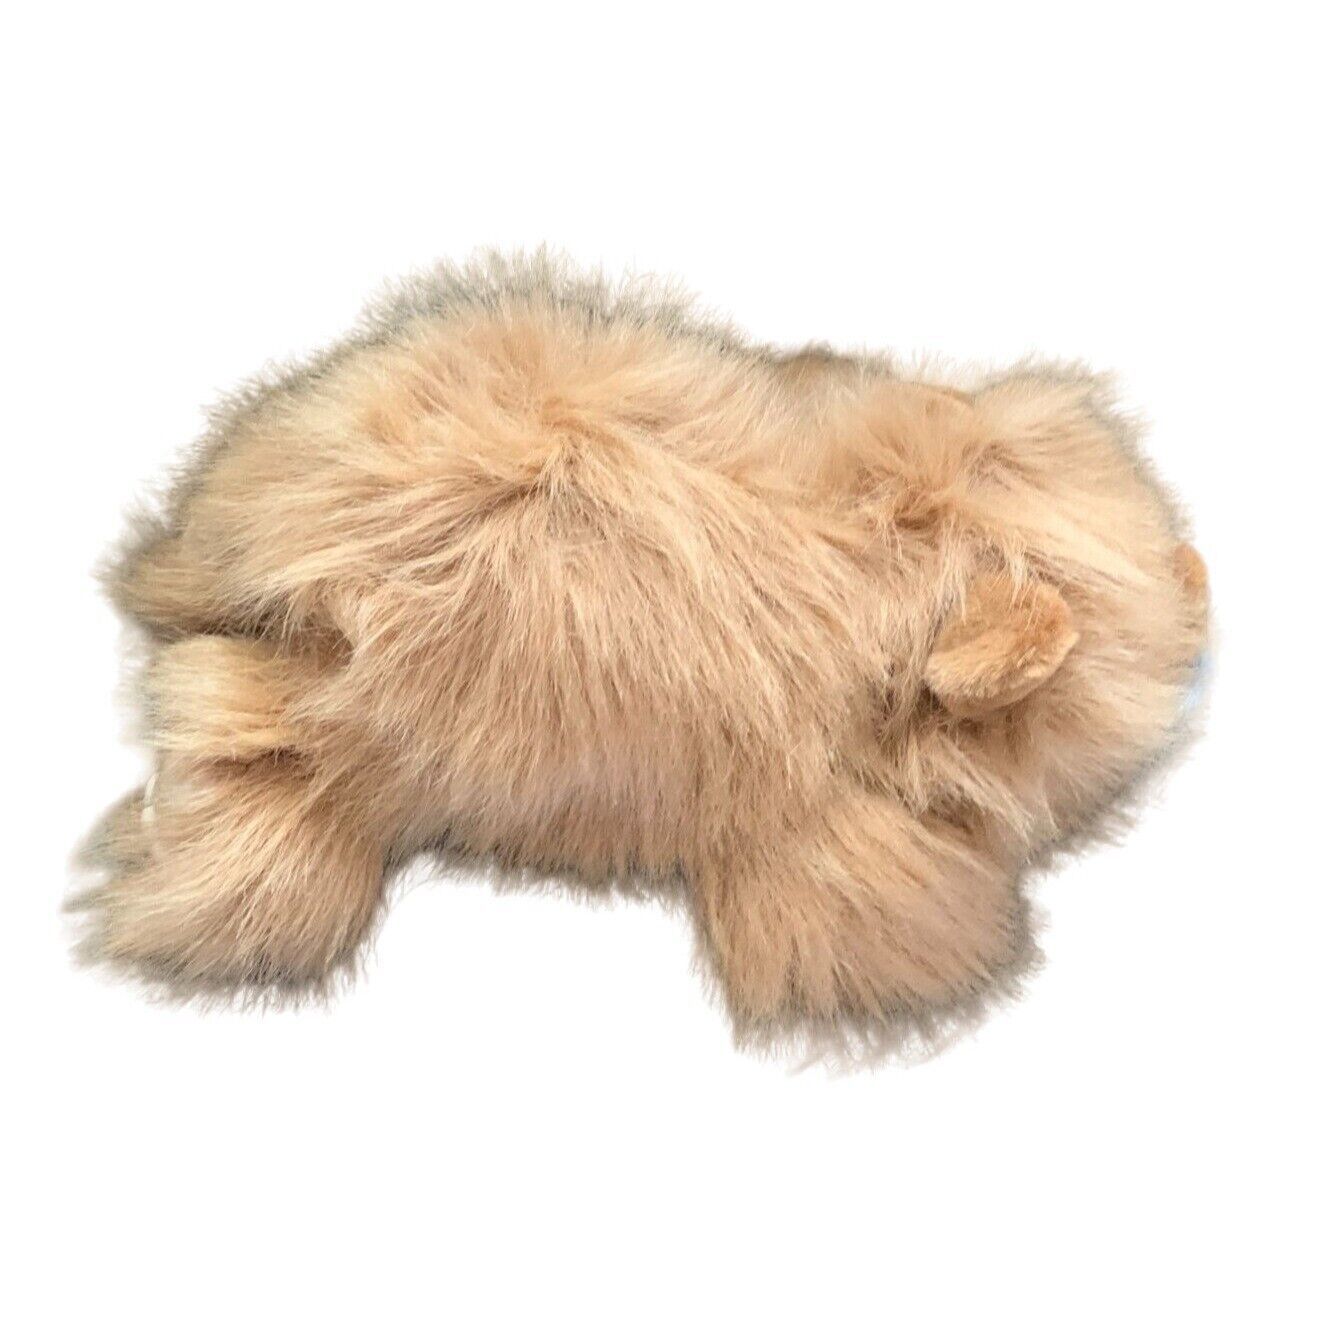 Primary image for Manhattan Toy Co Plush Stuffed Animal Toy Furry Fuzzy Dog Puppy 16 in Length 199